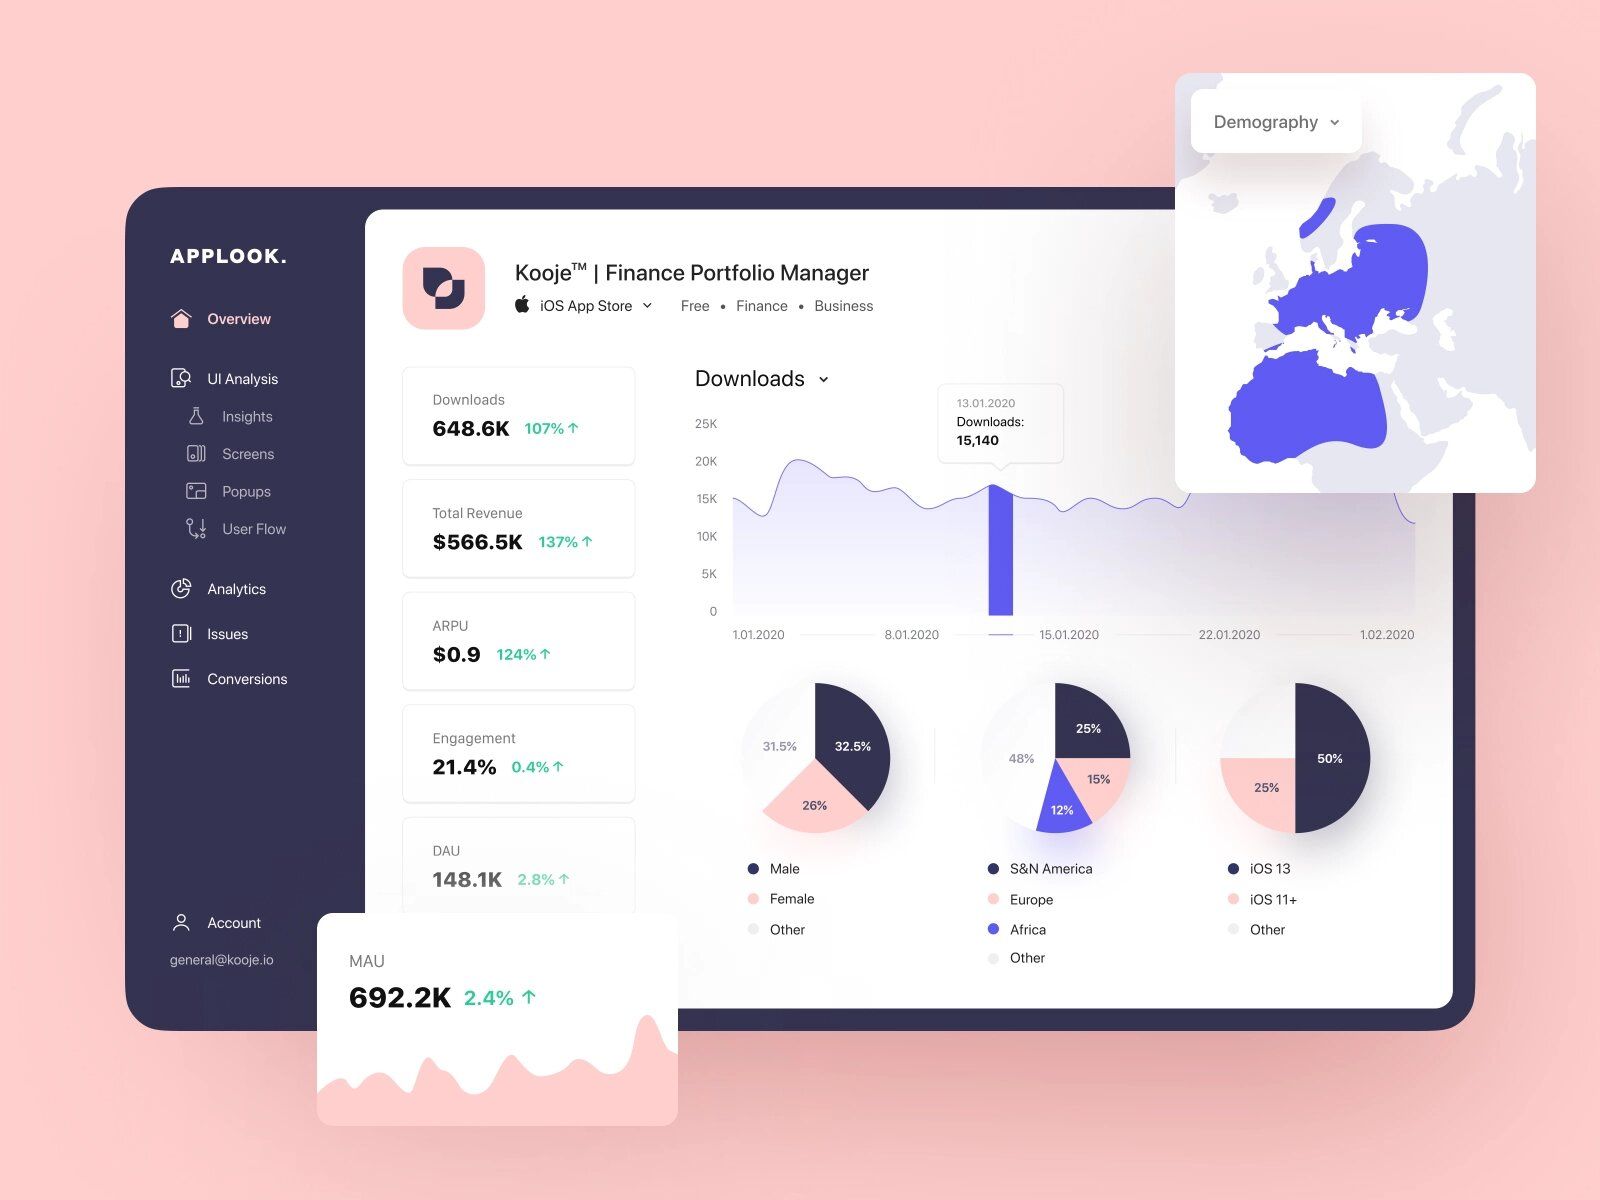 An accounting software should be regularly audited for breaches and tested for bugs since accounting solutions store highly-sensitive informatio (*image by [Alexander Plyuto 🎲](https://dribbble.com/alexplyuto){ rel="nofollow" target="_blank" .default-md}*)